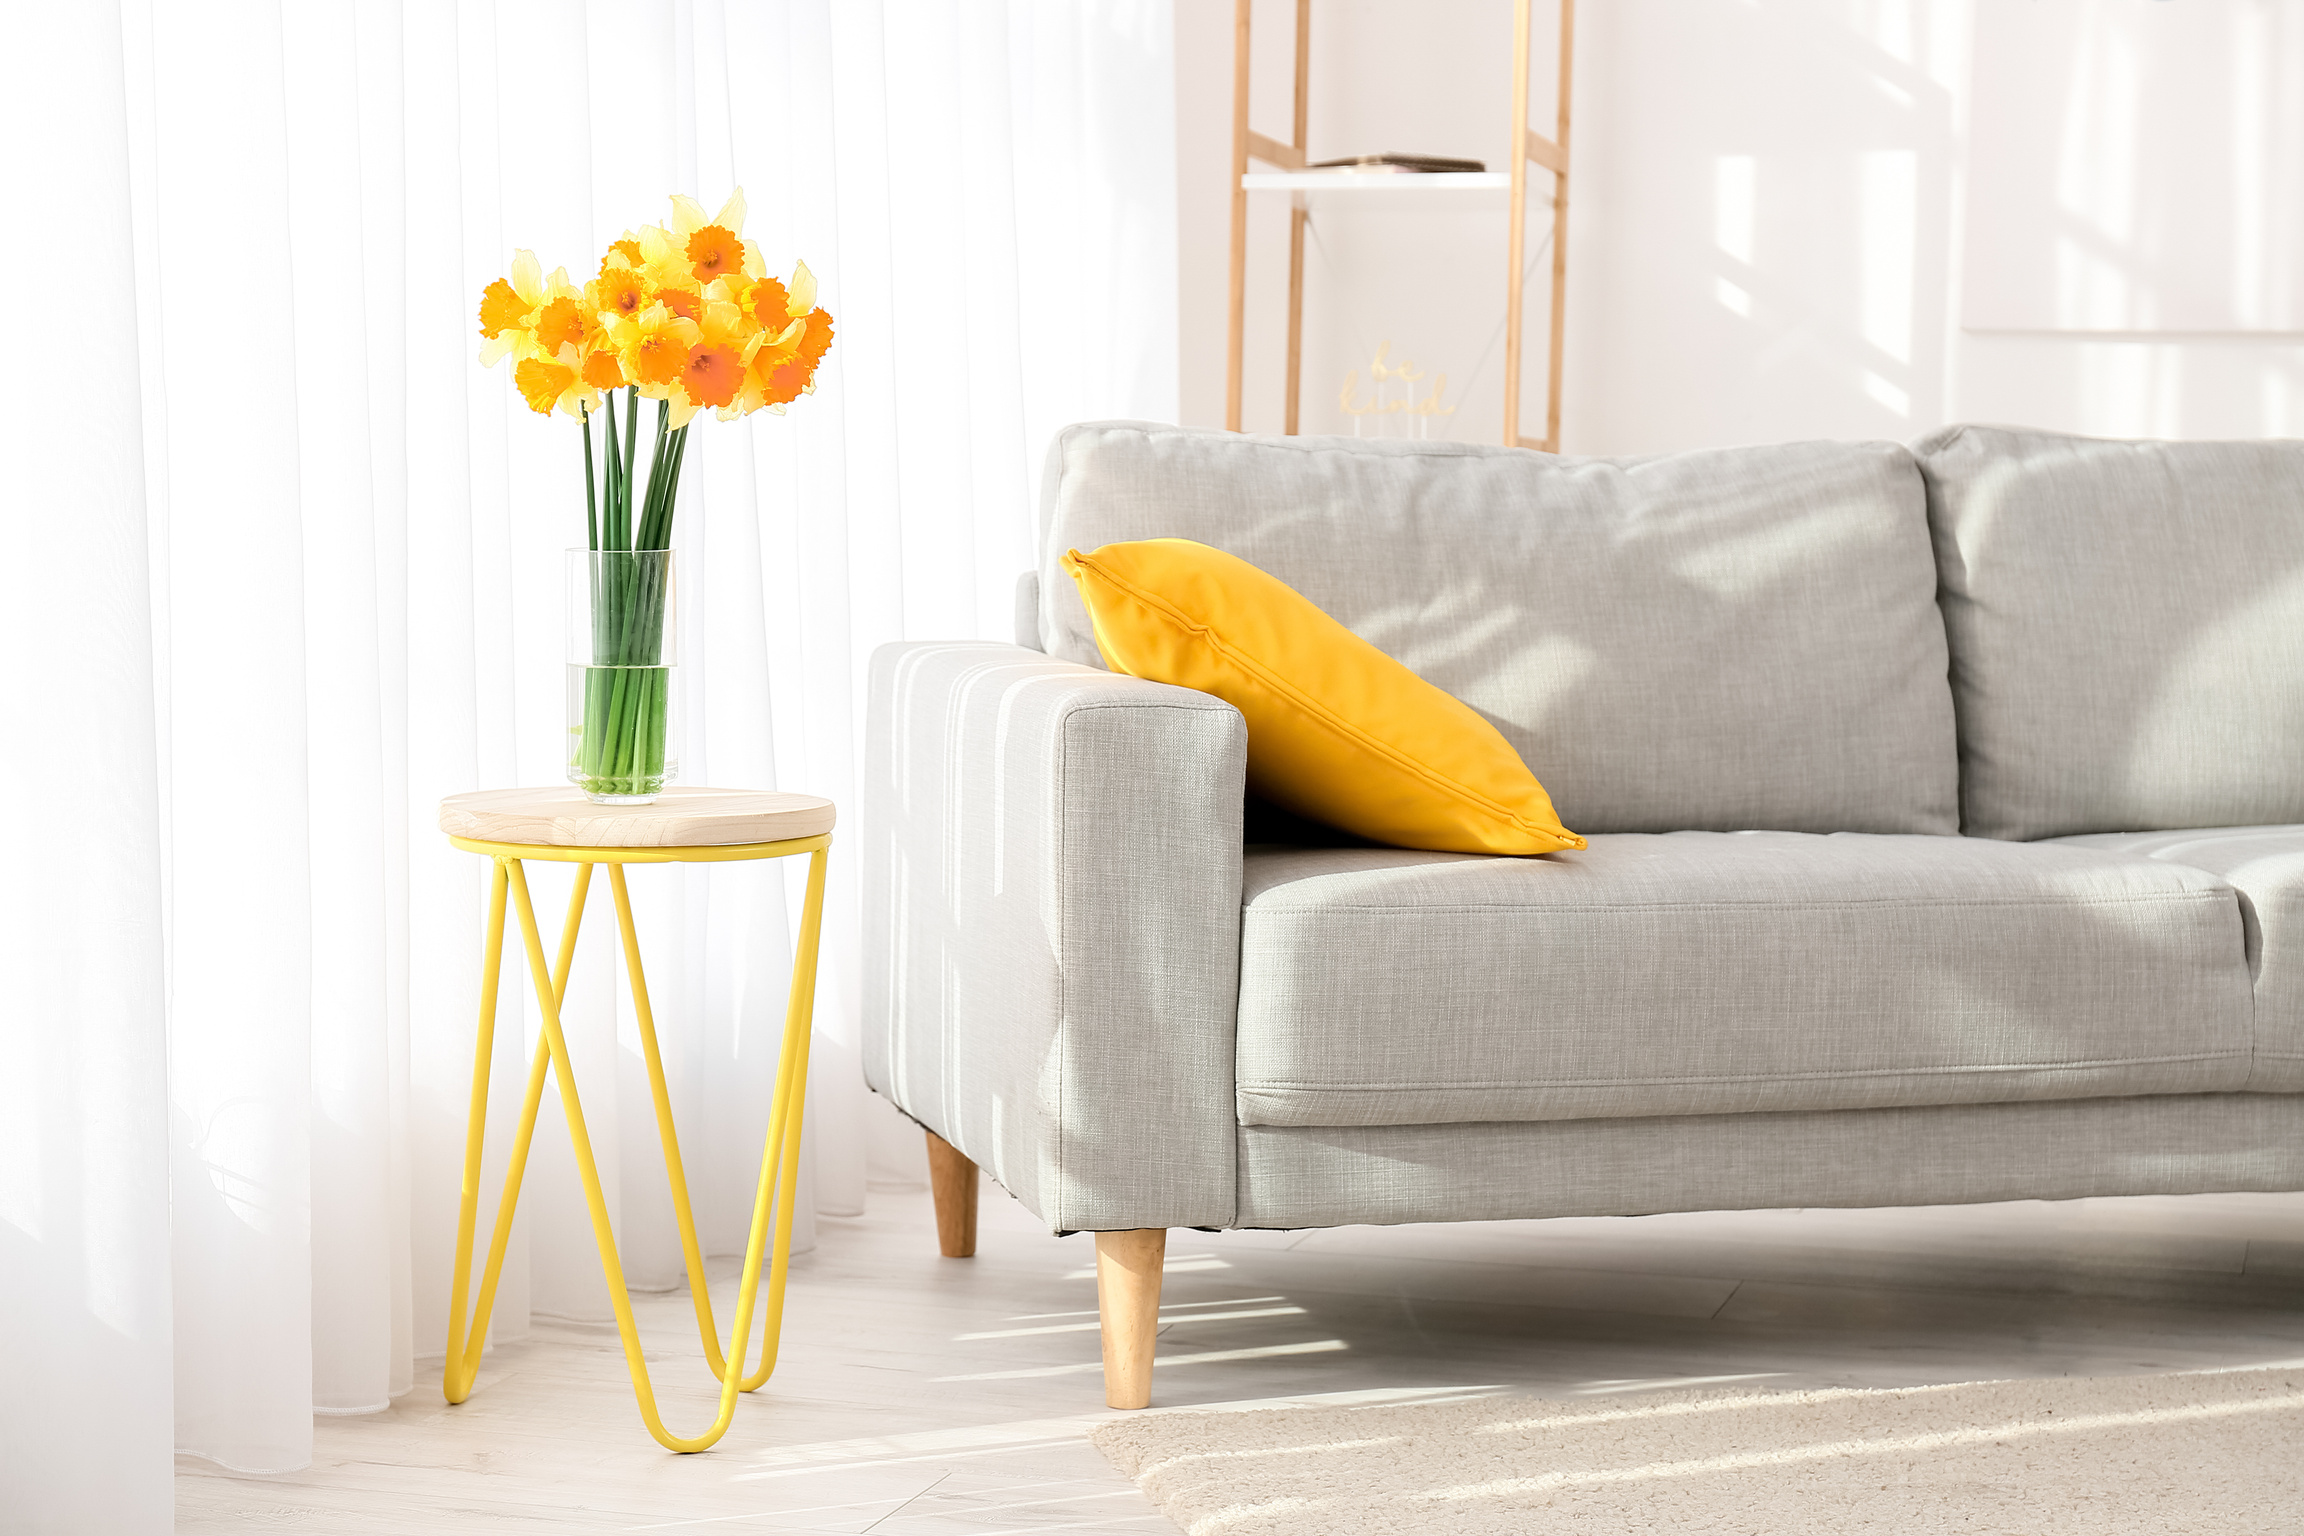 Interior of Modern Room with Comfortable Sofa and Yellow Accent